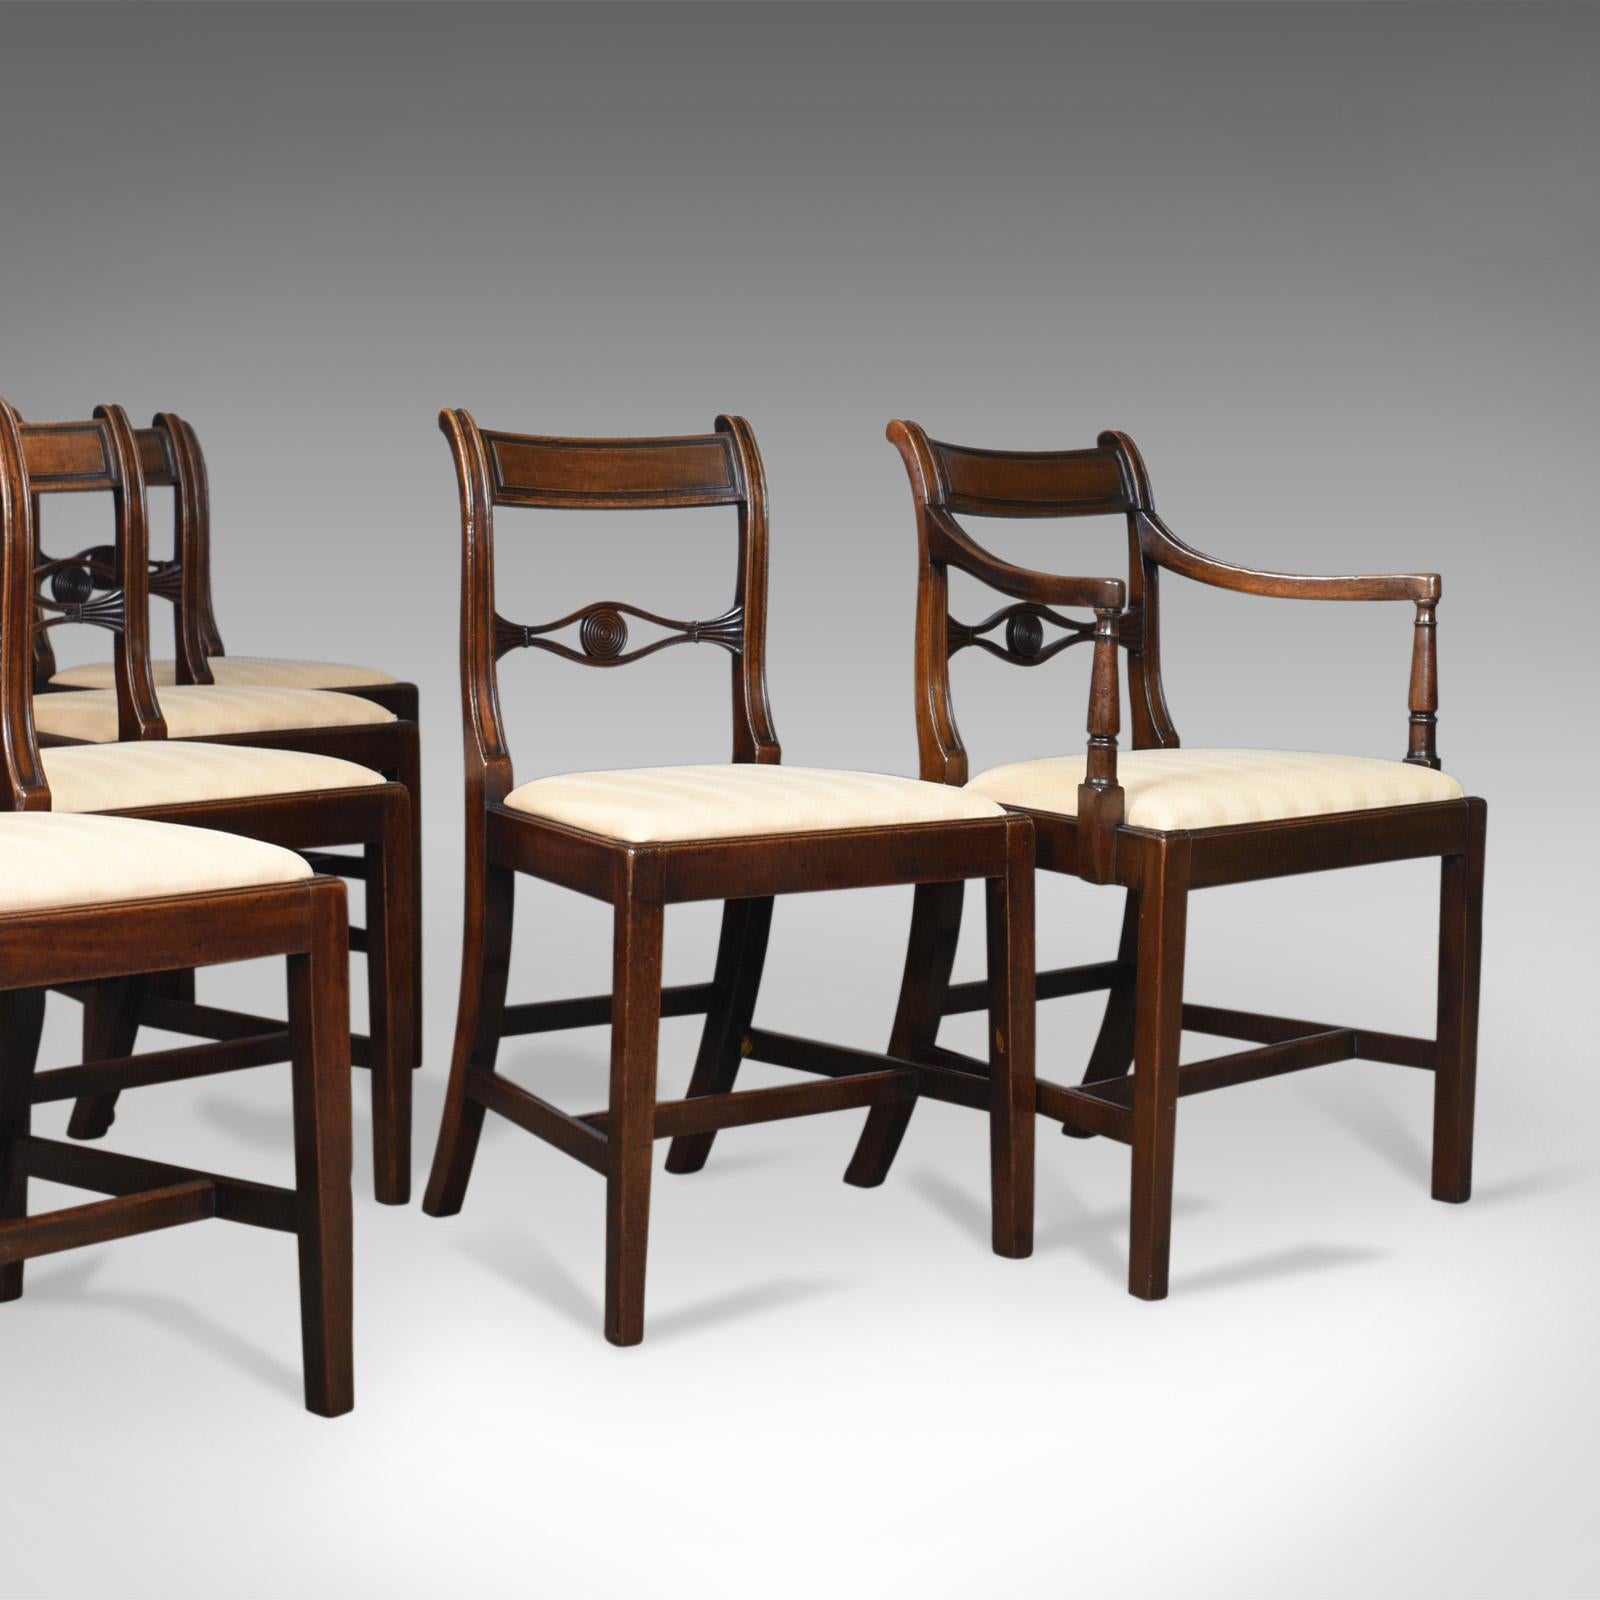 This is a set of six antique dining chairs, 5+1 English, Regency, mahogany chairs dating to the early 19th century, circa 1820. 

A superior set of chairs in select mahogany with a desirable patina
Five side chairs and a single 'father', elbow,